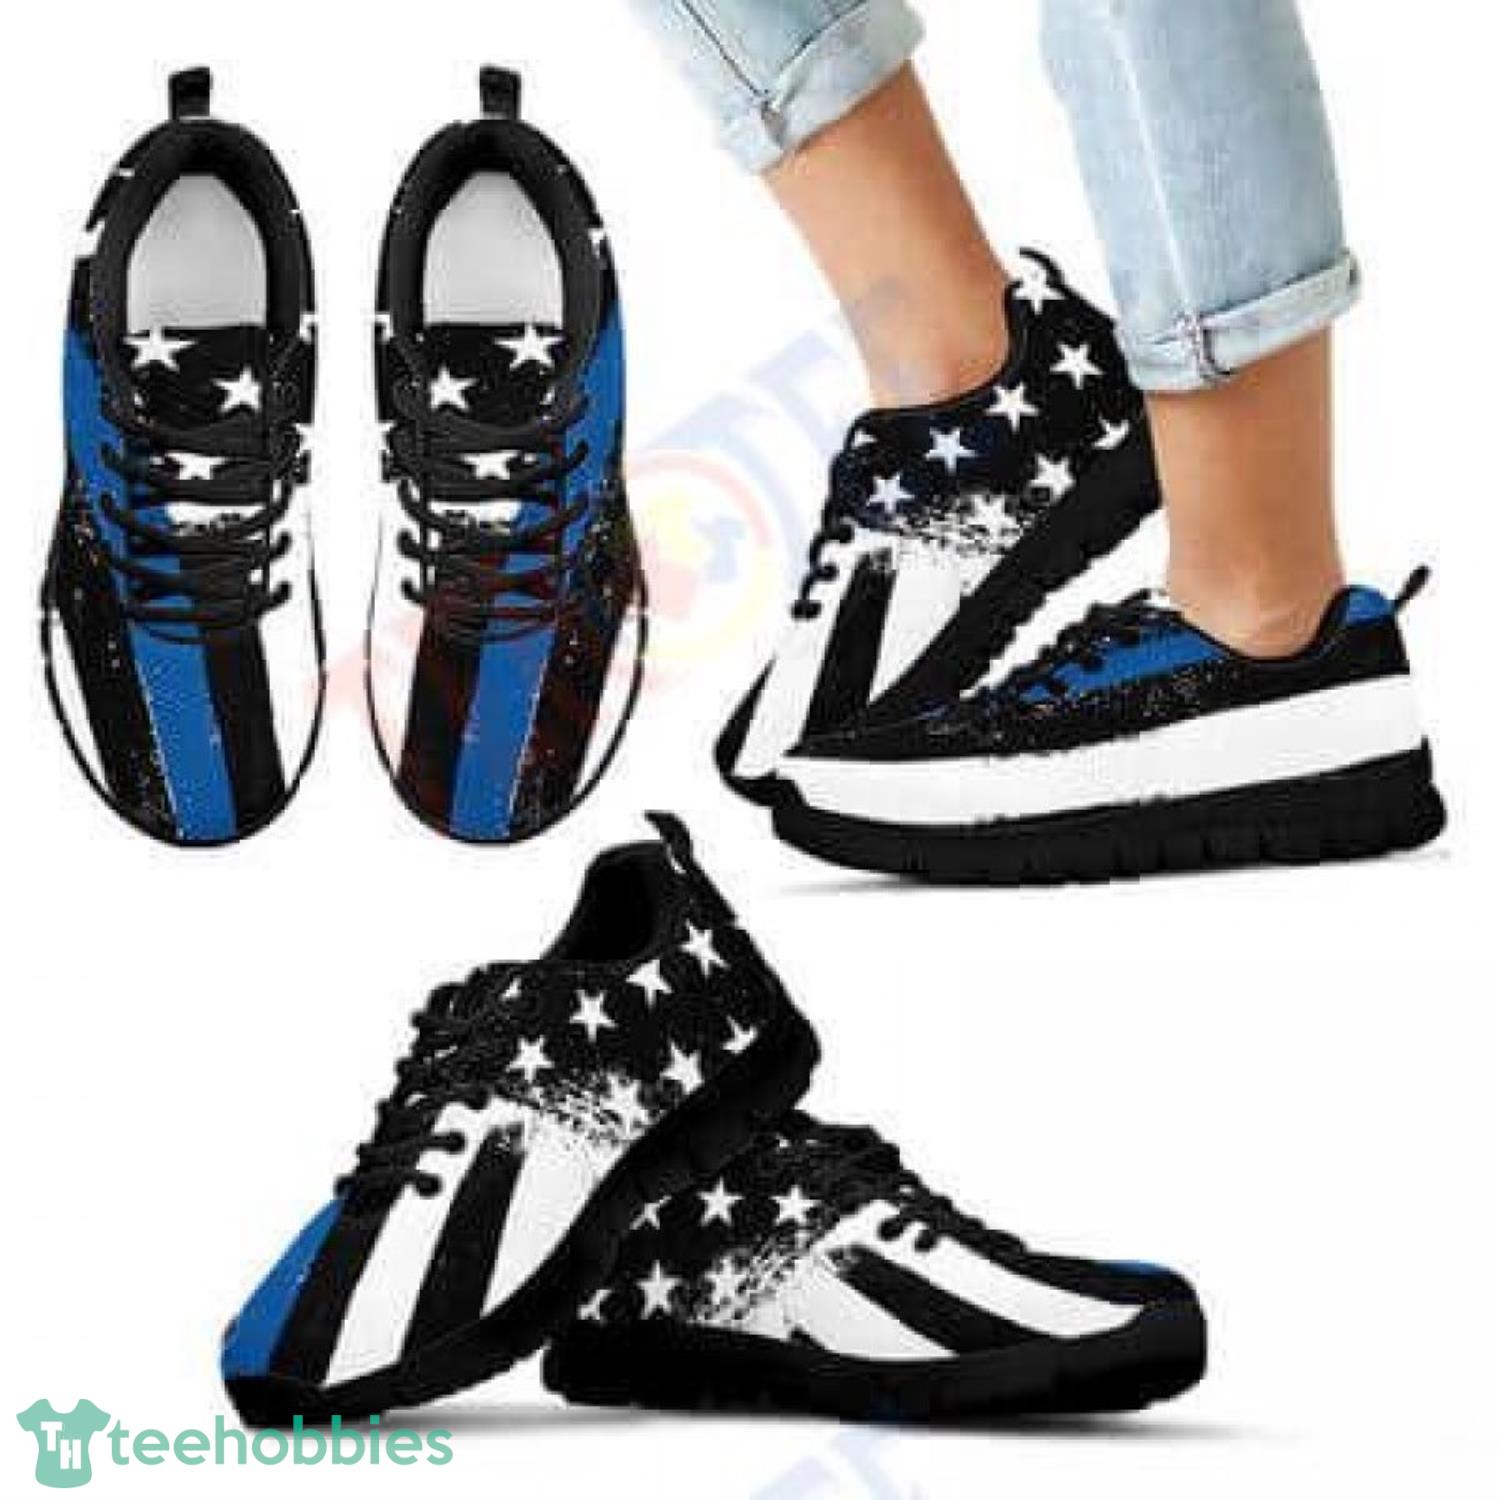 American Police Flag Sneakers For Men Women Product Photo 1